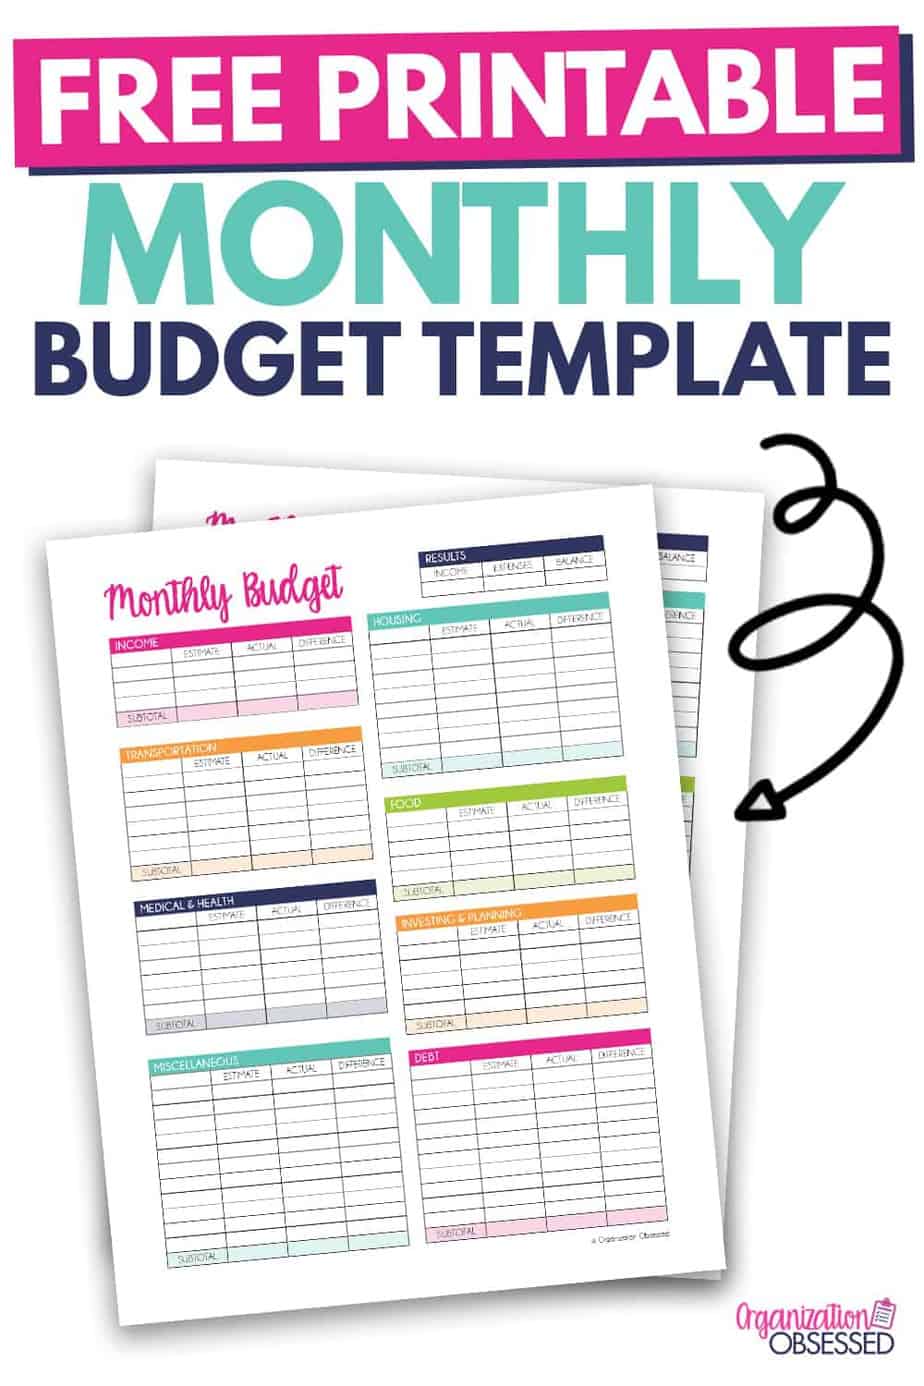 monthly budget template free printable organization obsessed